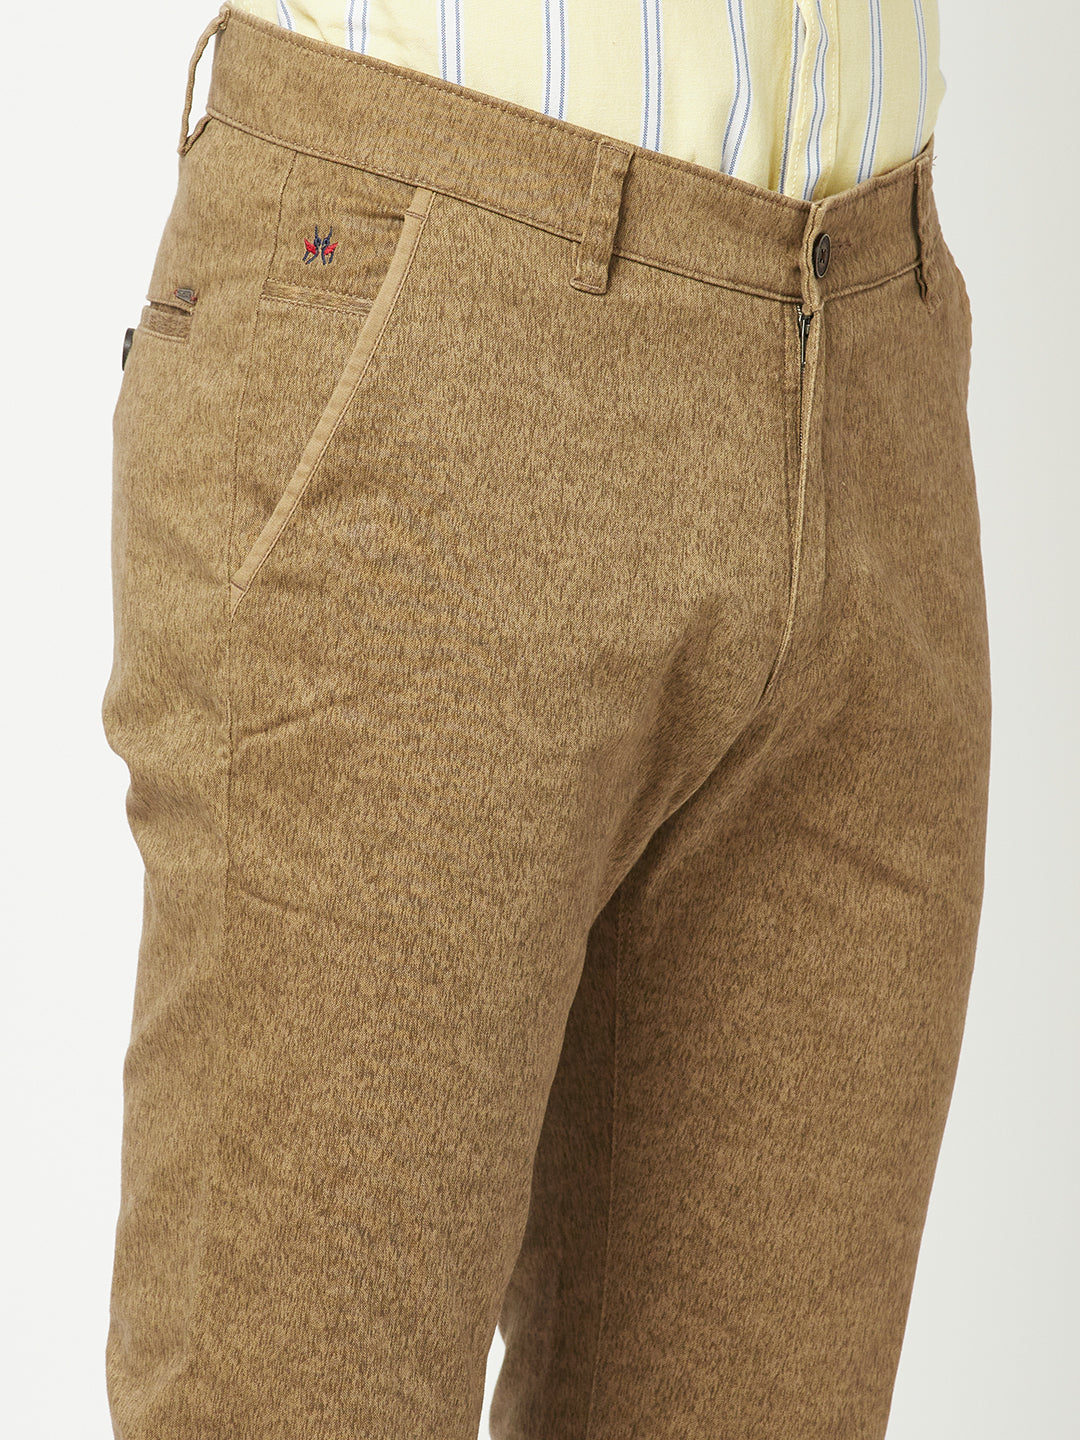  Textured Fawn Trousers